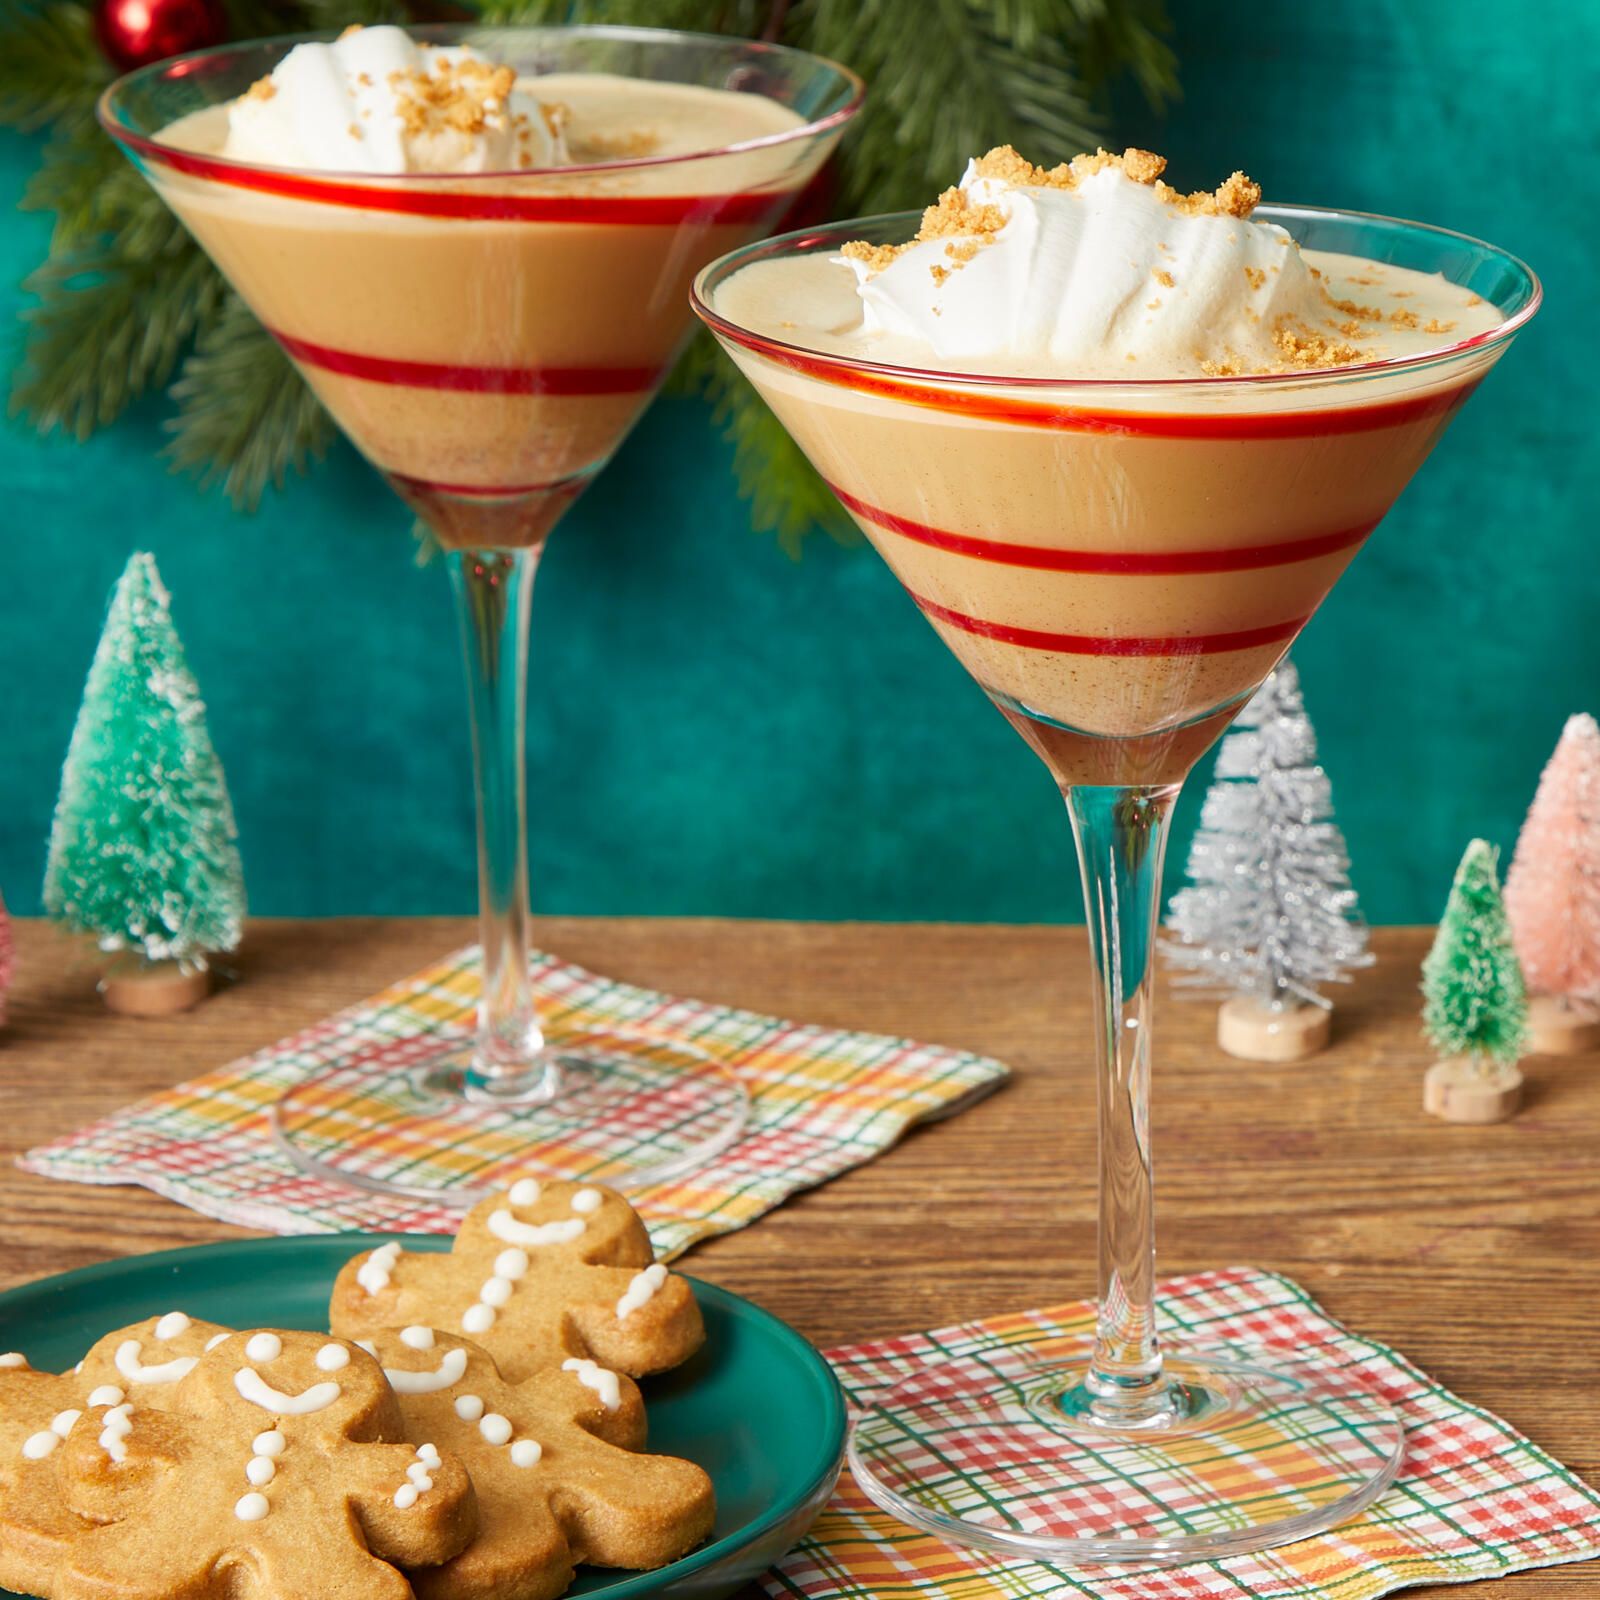 Gingerbread Cookie Martini - Holiday Cocktails On Demand – Bartesian